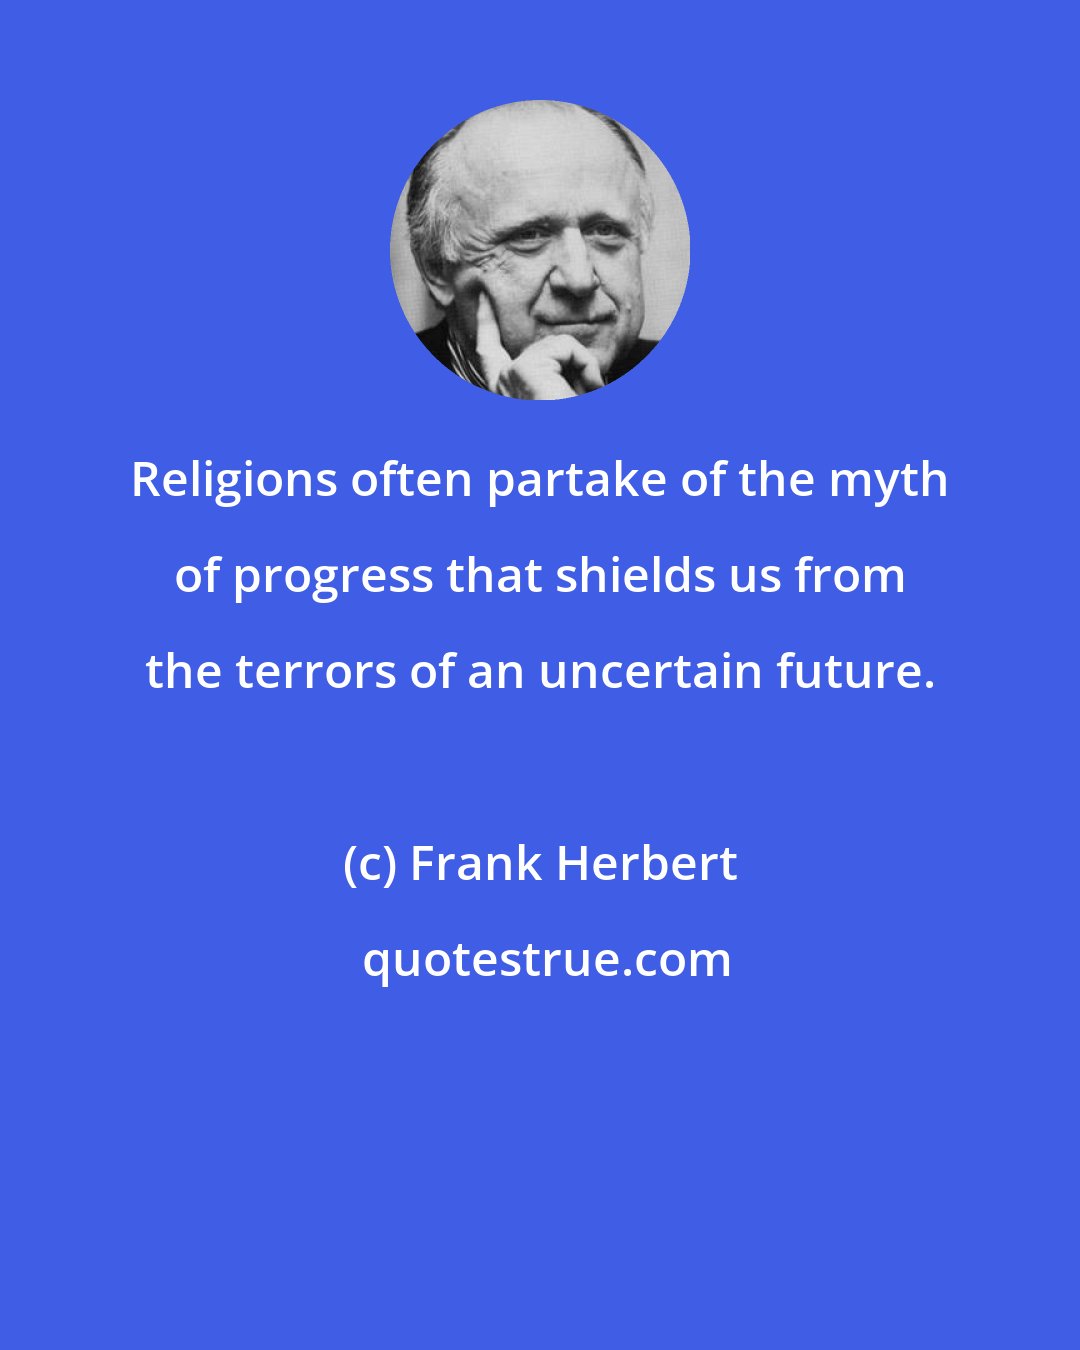 Frank Herbert: Religions often partake of the myth of progress that shields us from the terrors of an uncertain future.